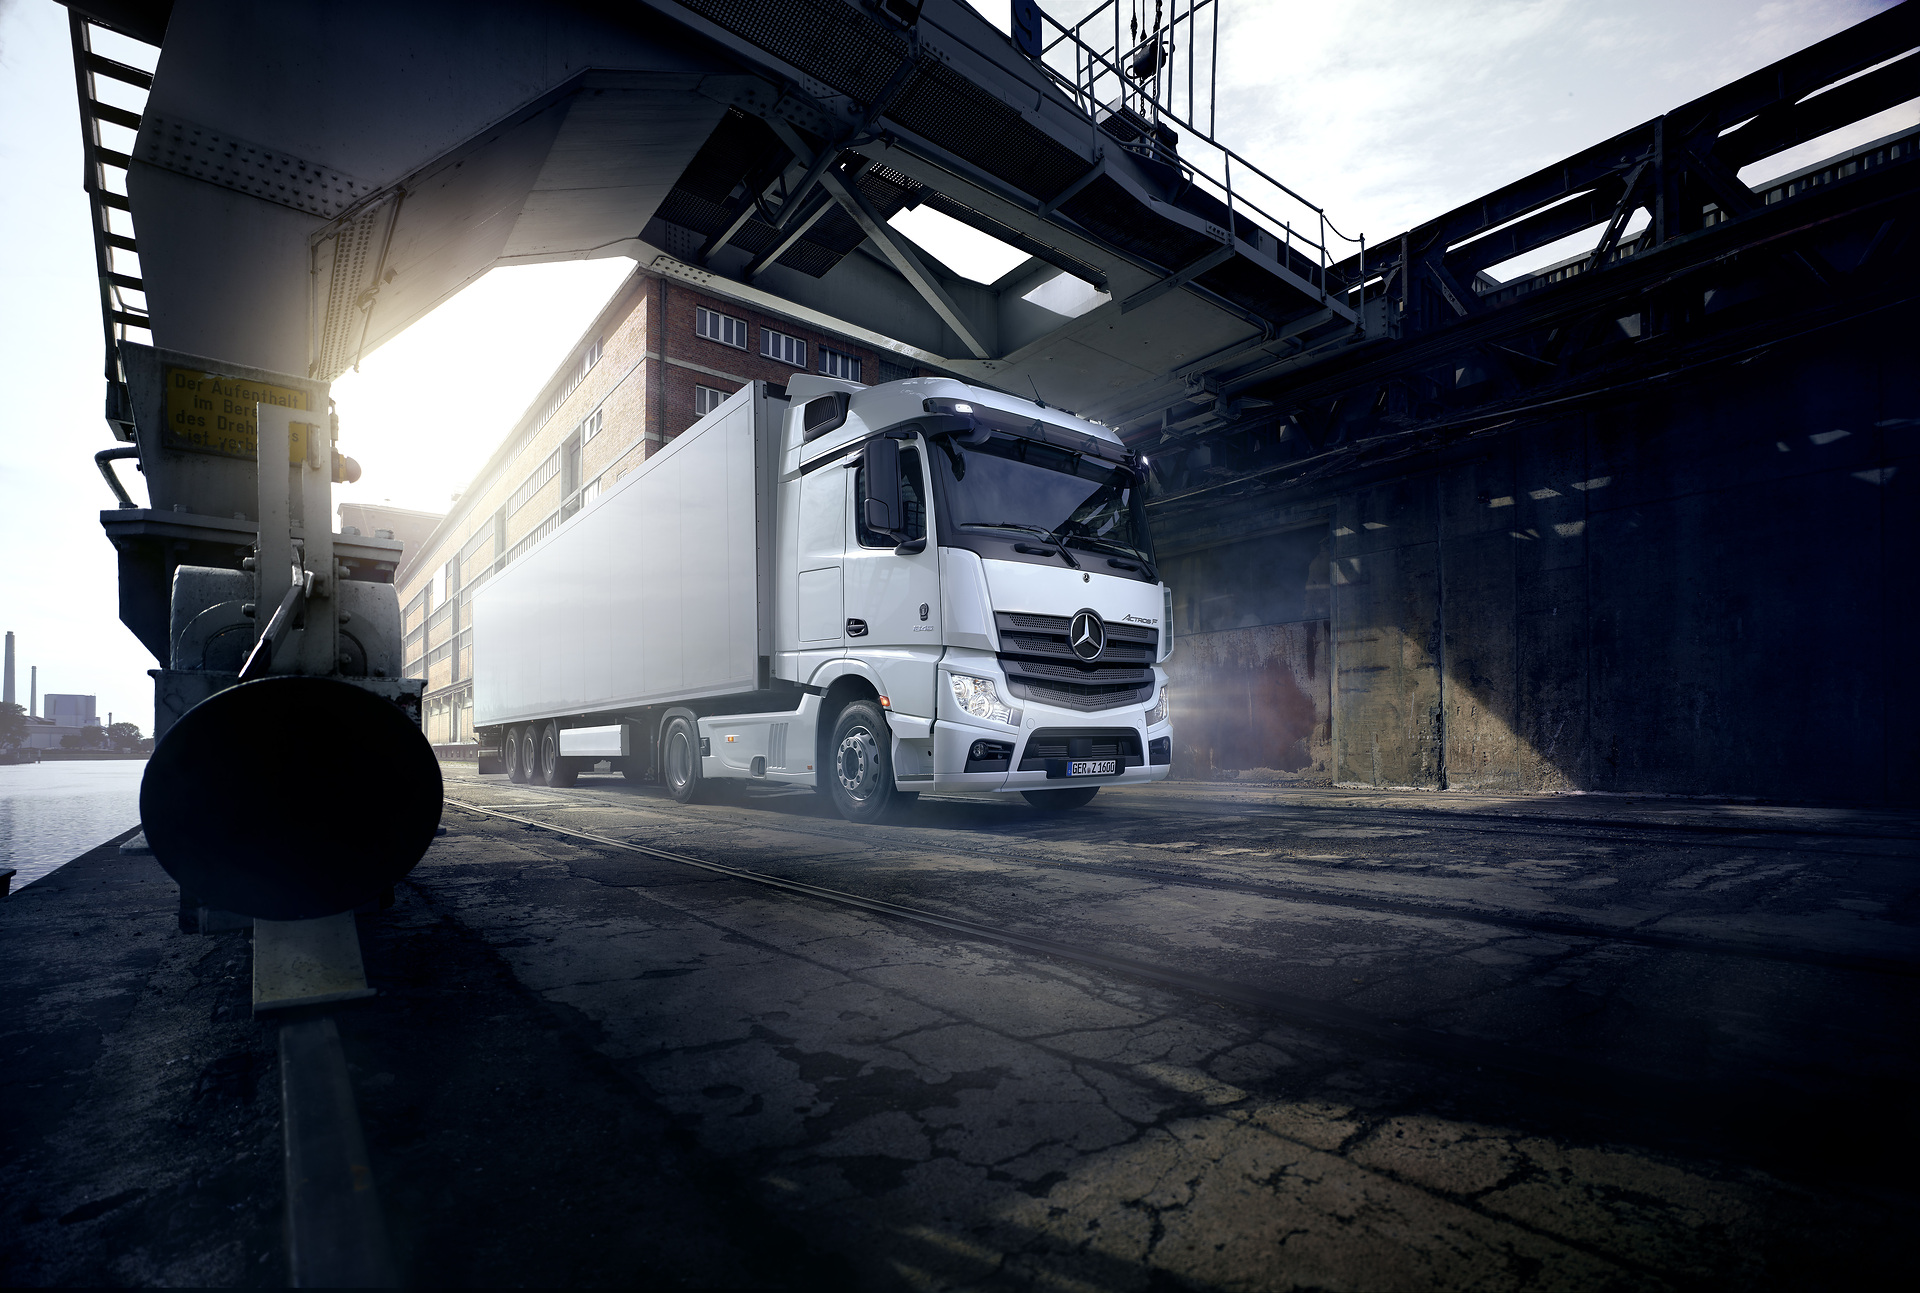 New truck models of the Actros range now available for order: sales start of Actros F and Edition 2